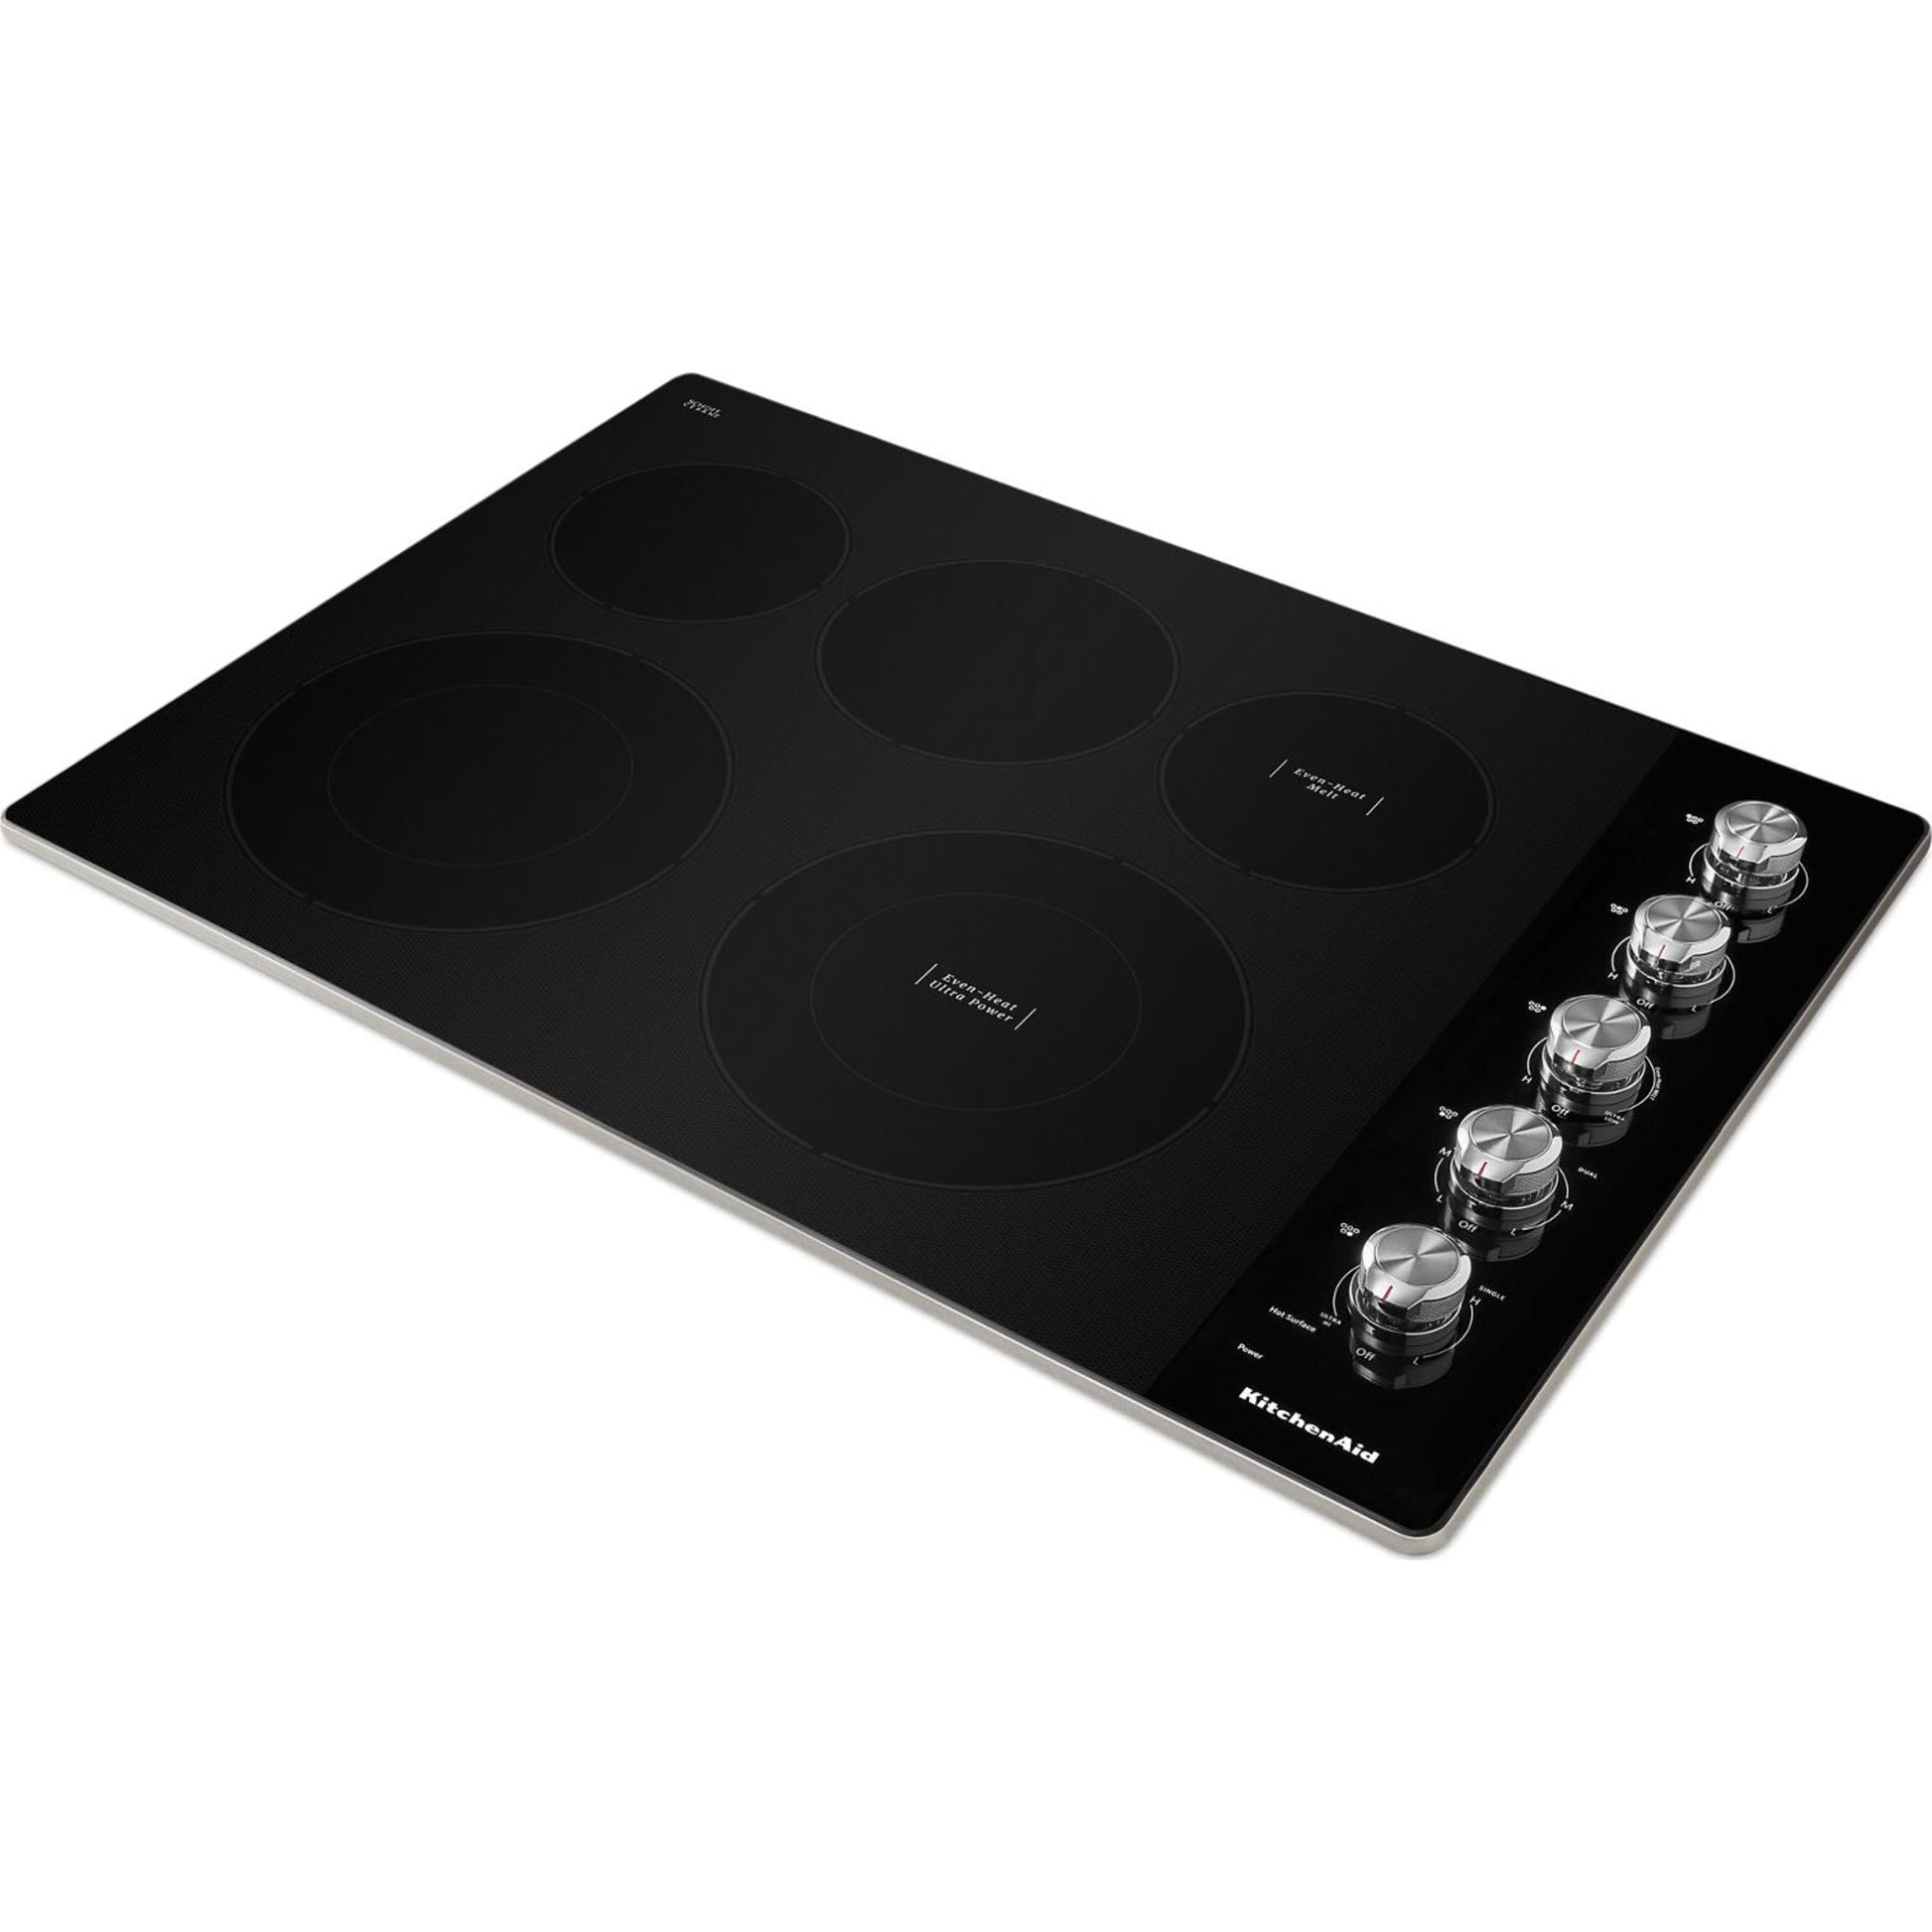 KitchenAid 30" Cooktop (KCES550HSS) - Stainless Steel